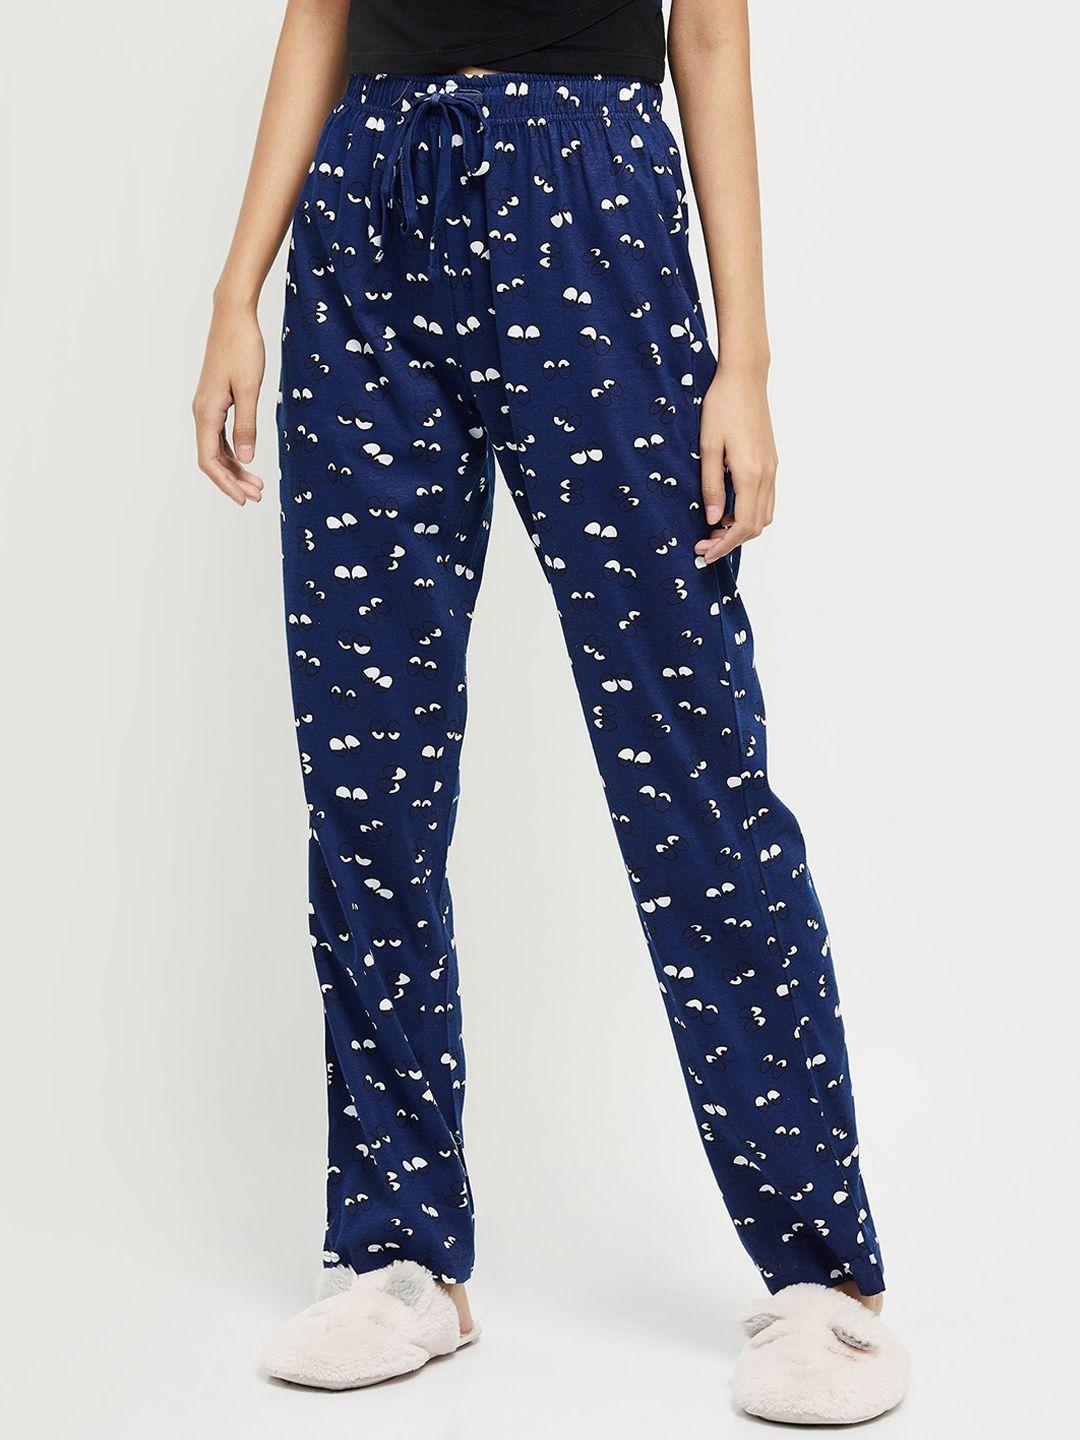 max women navy blue printed pure cotton lounge pant